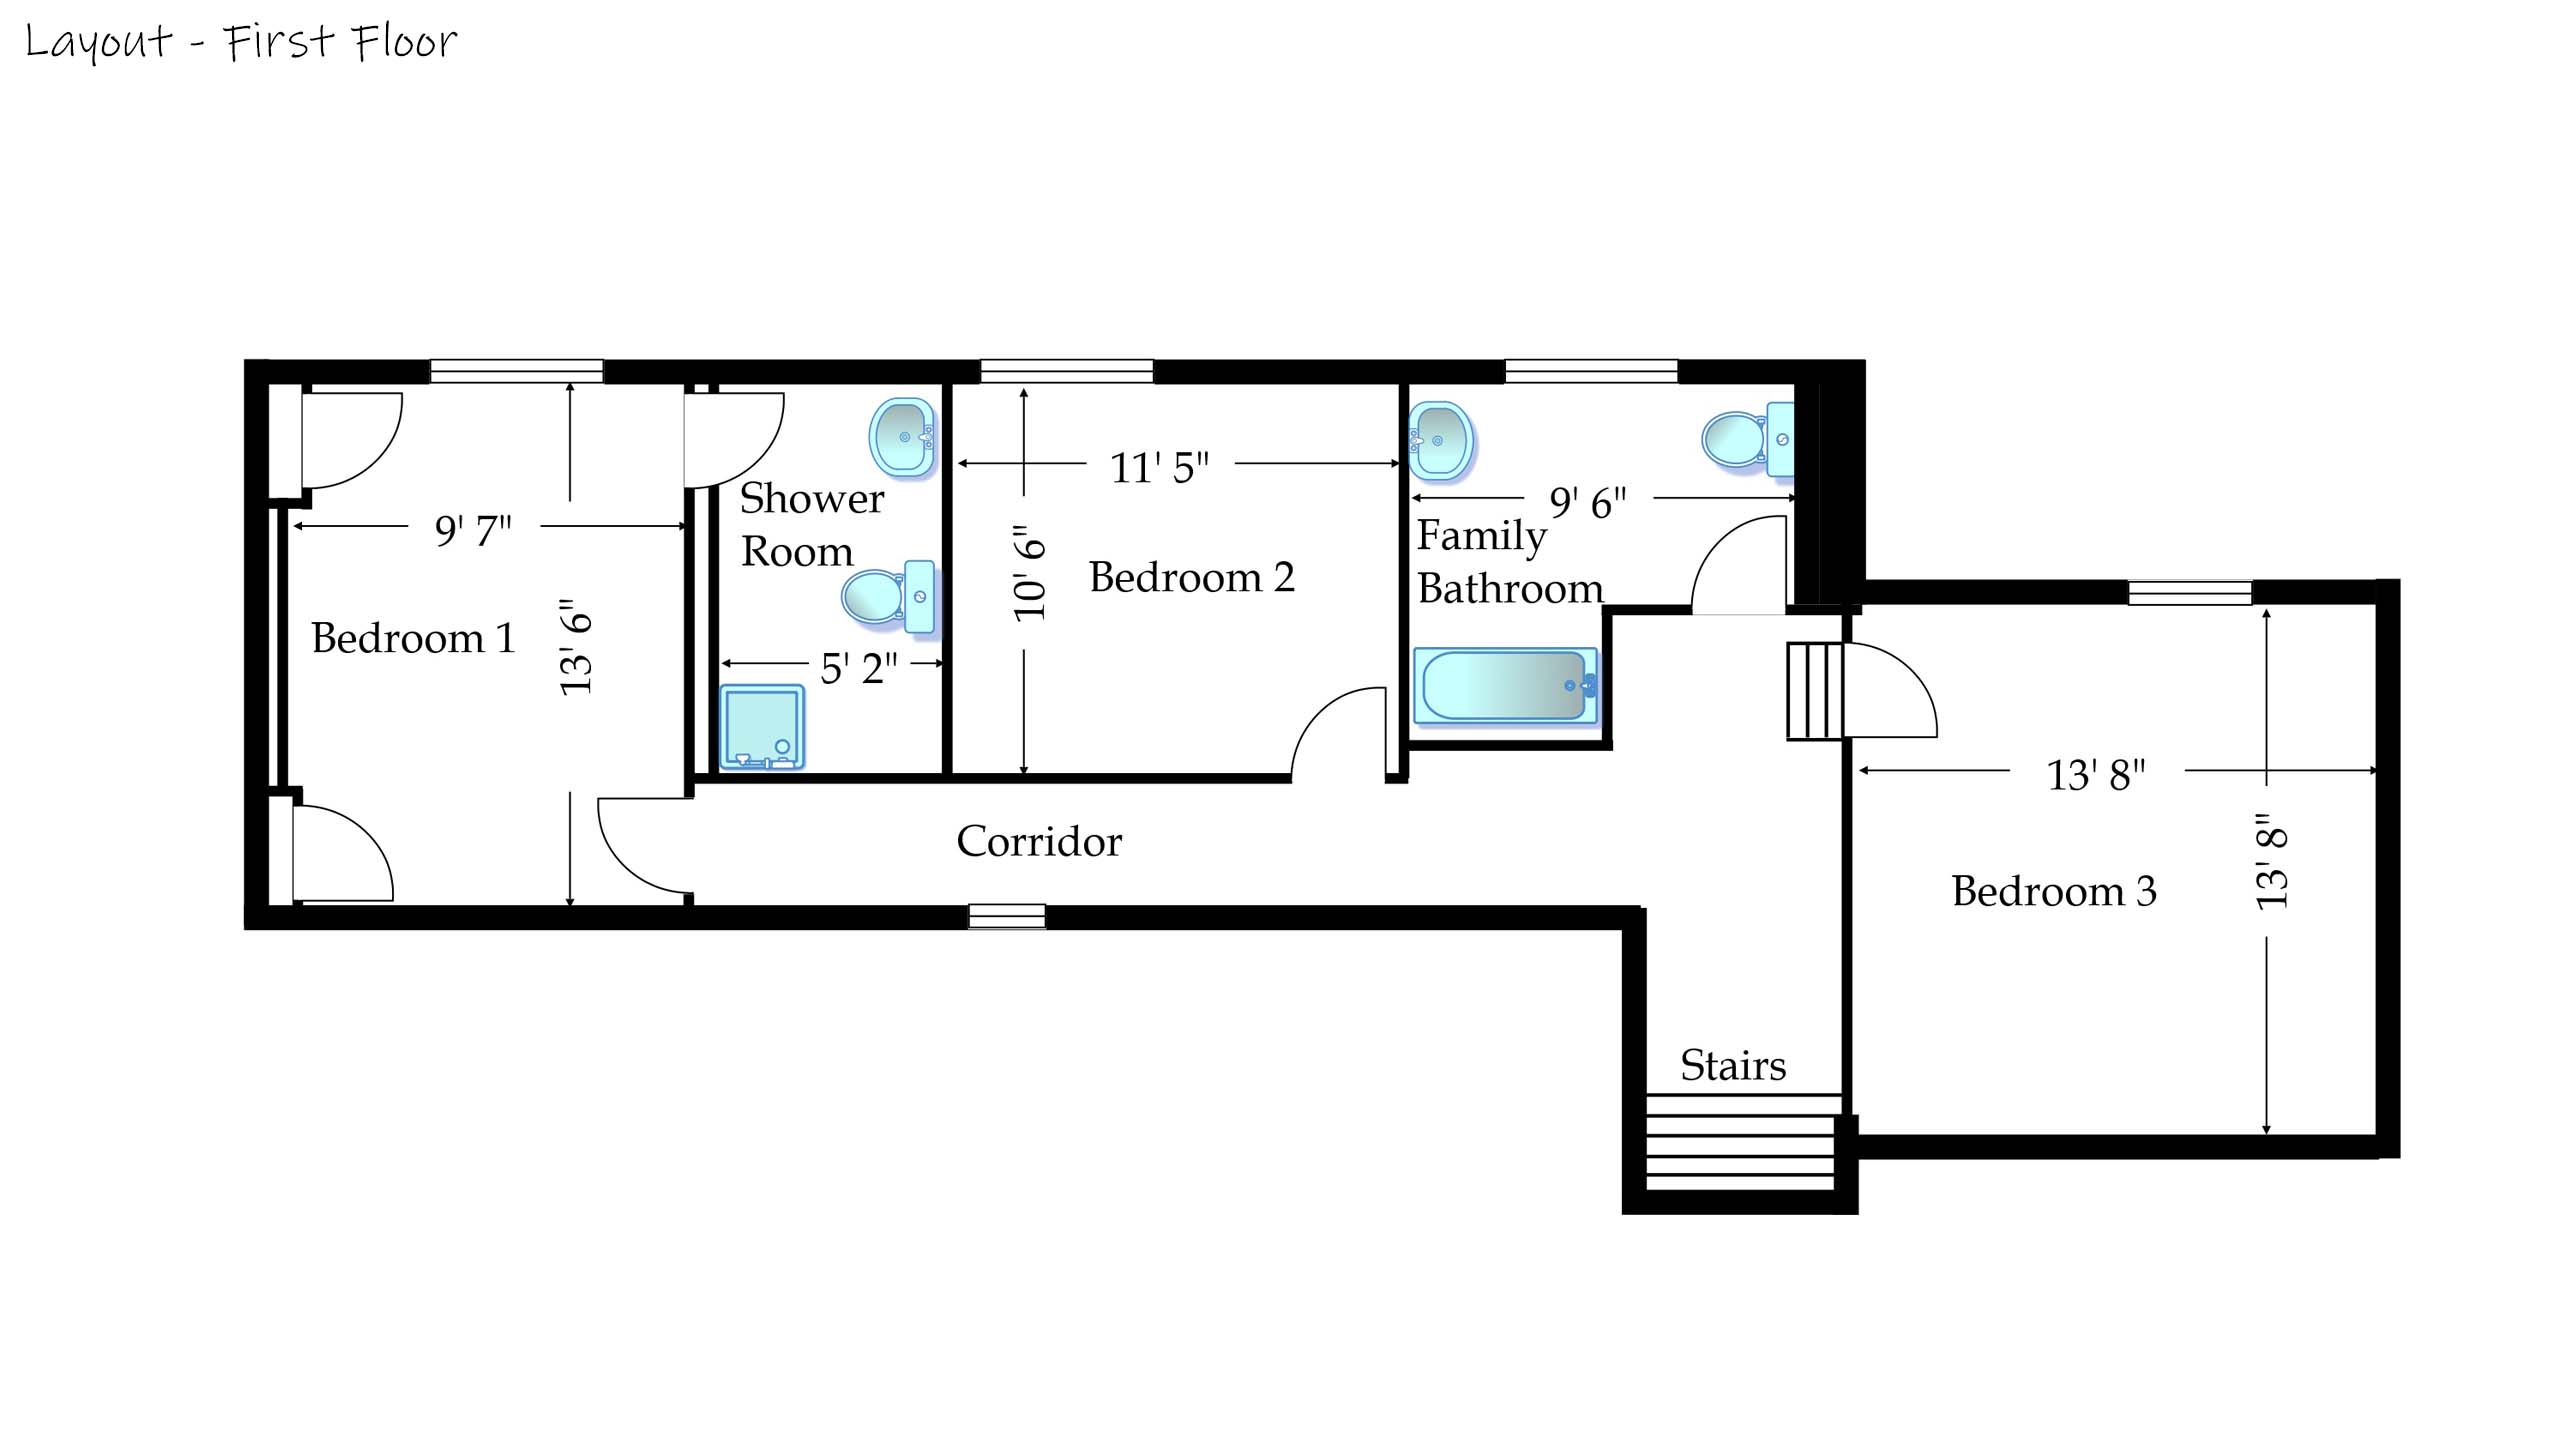 Harry's House, First Floor Layout